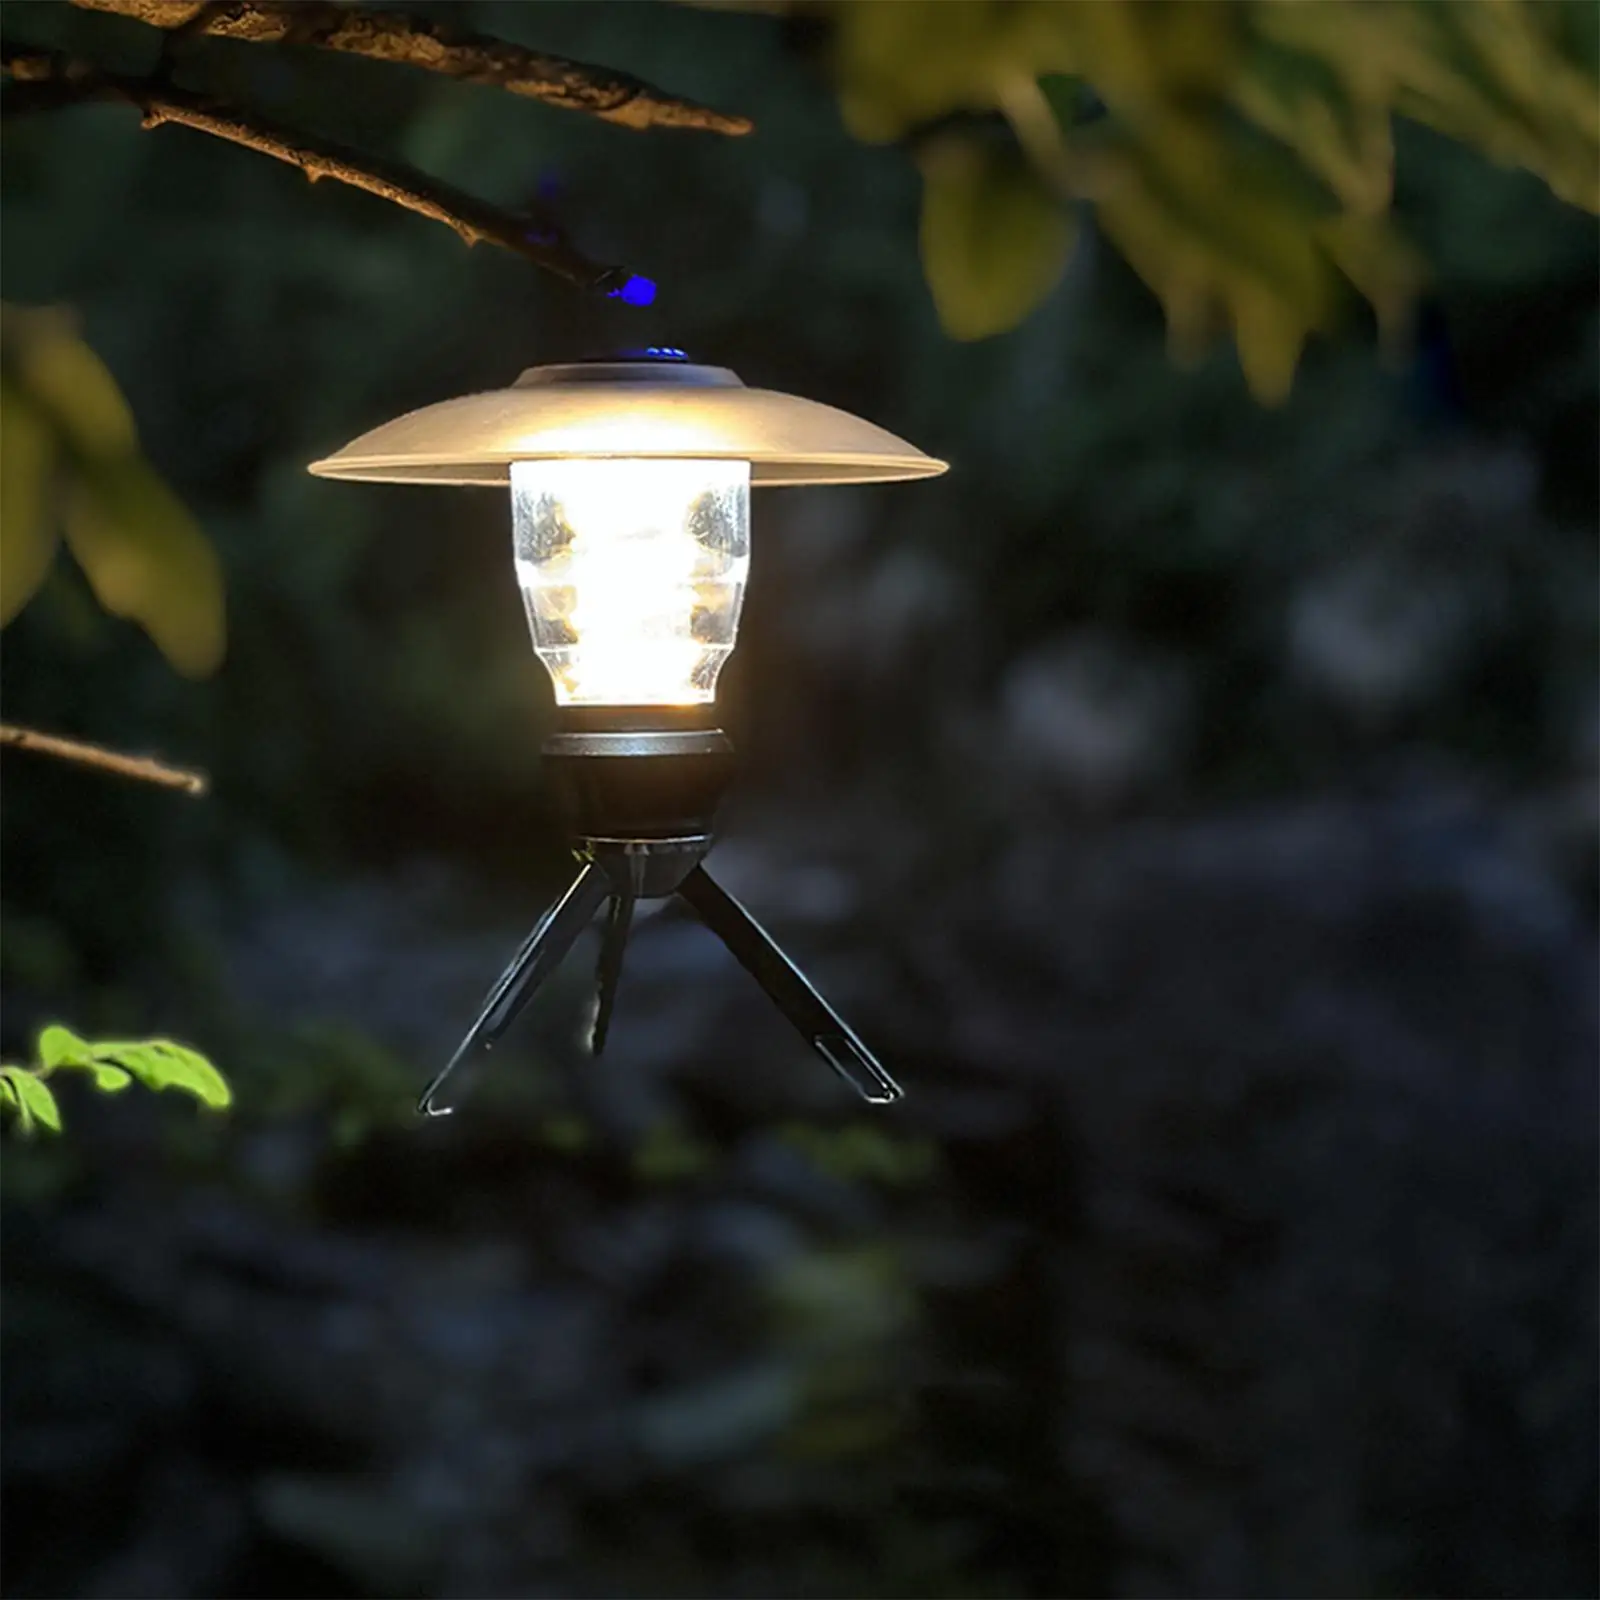 Camping Lantern Rechargeable Lightweight Detachable Tripod LED Camping Tent Light for Outage Outdoor Backpacking Hiking Fishing